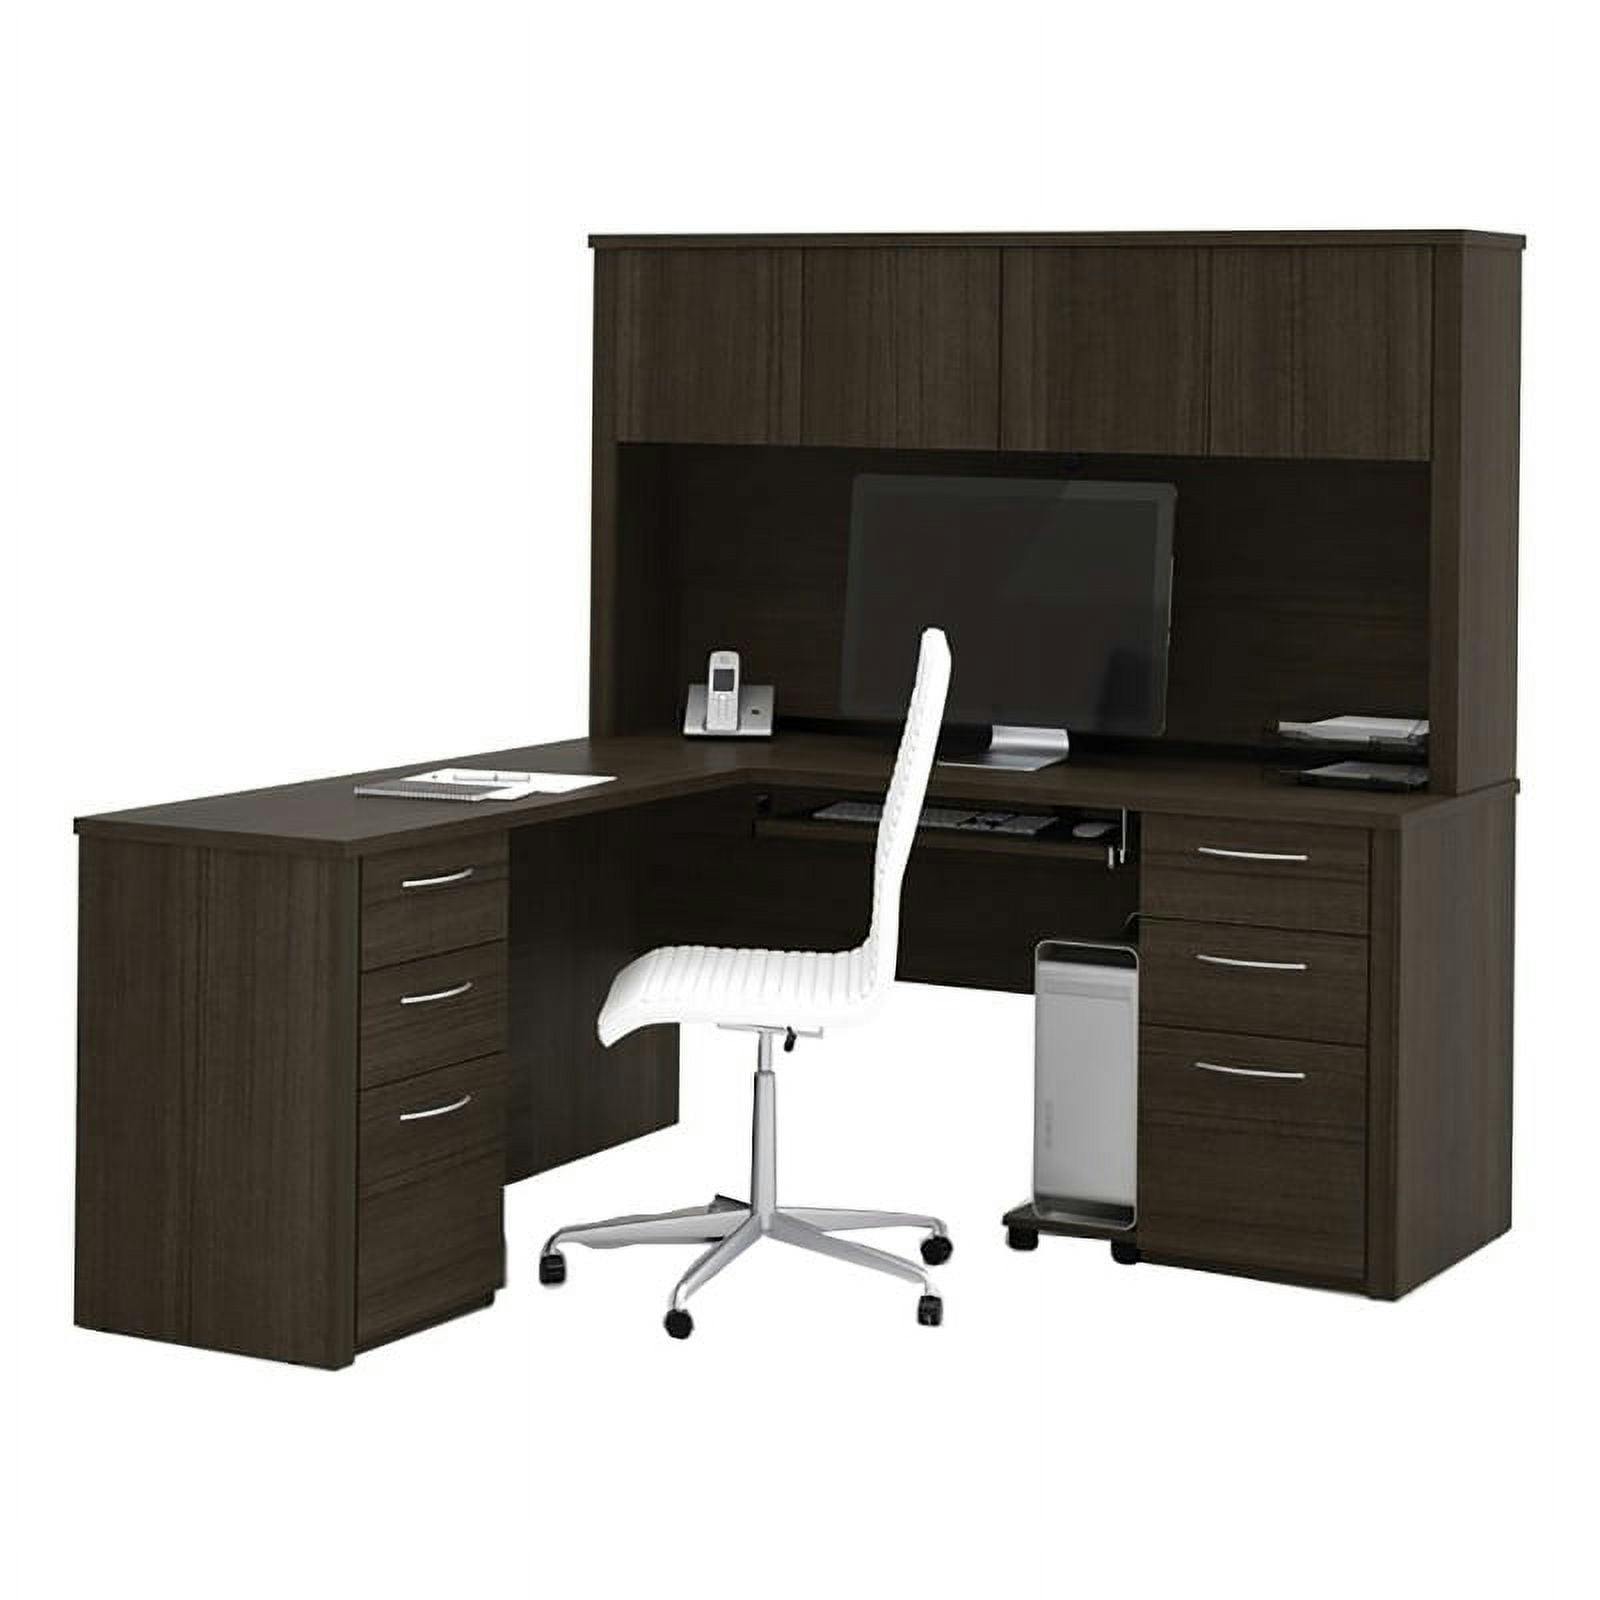 Executive 70'' Dark Chocolate Wood L-Shaped Desk with Hutch & Drawers